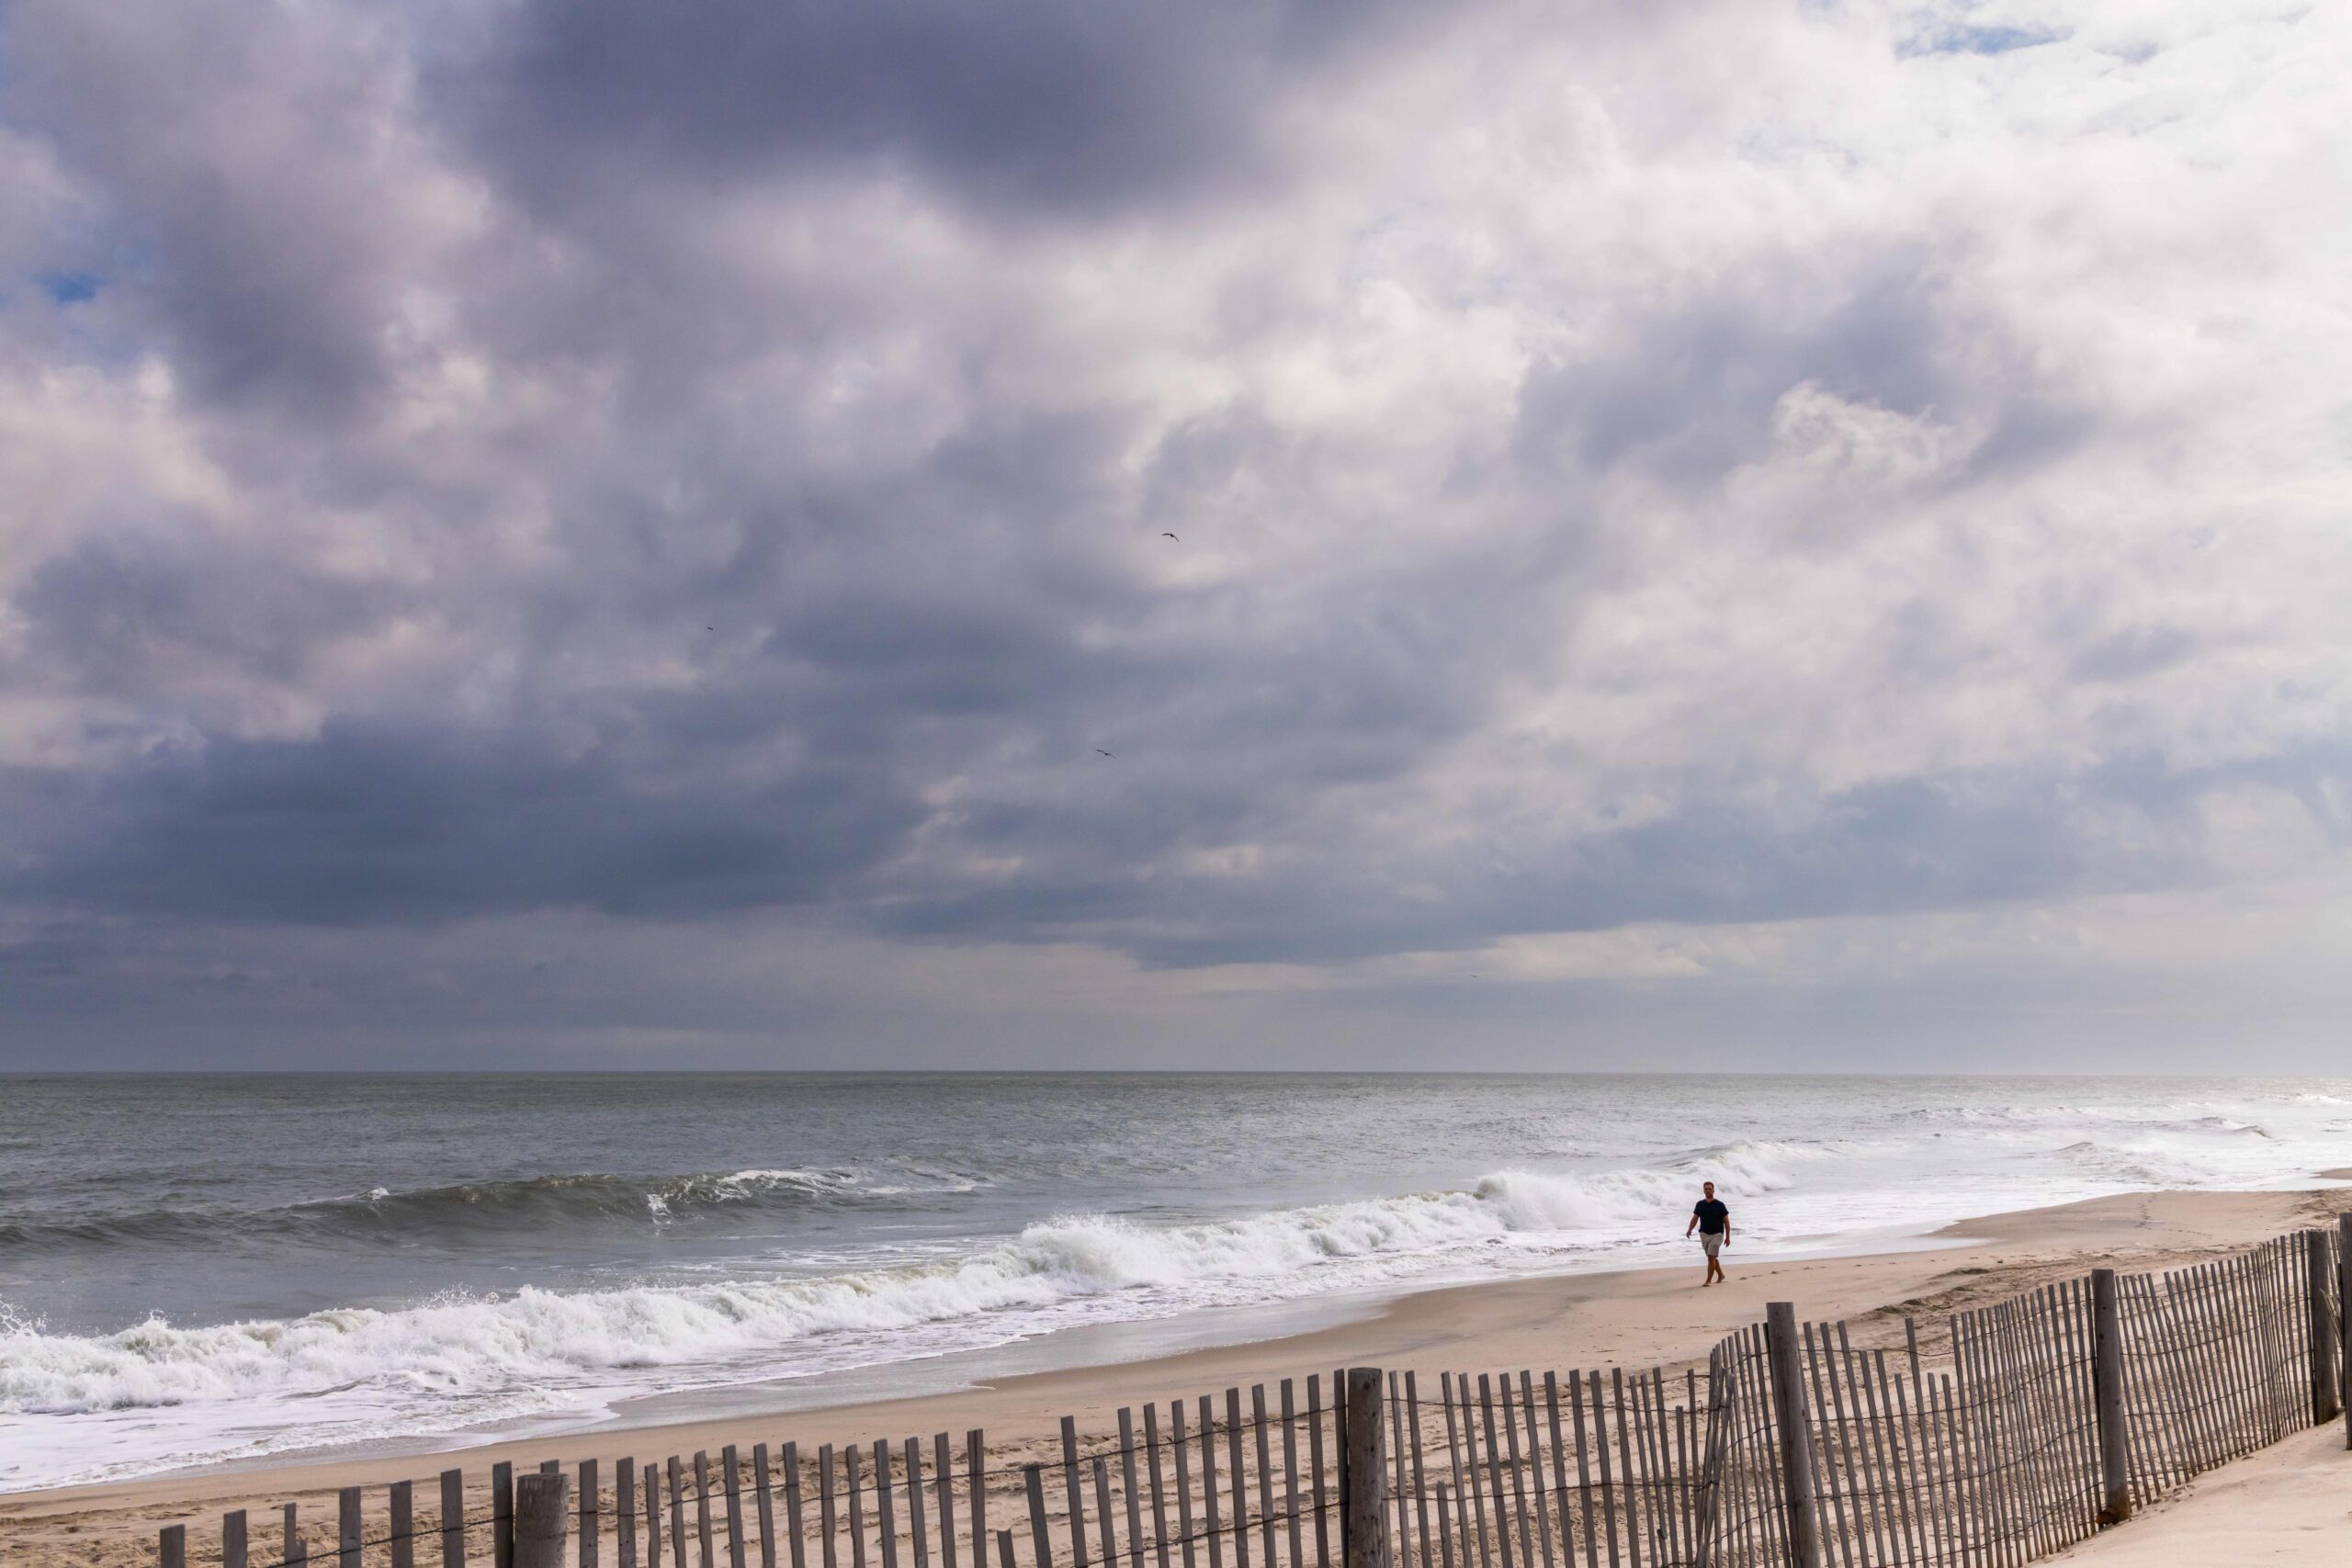 A person walking on the beach with clouds on the sky, a wave crashing, and the beach fence in the foreground